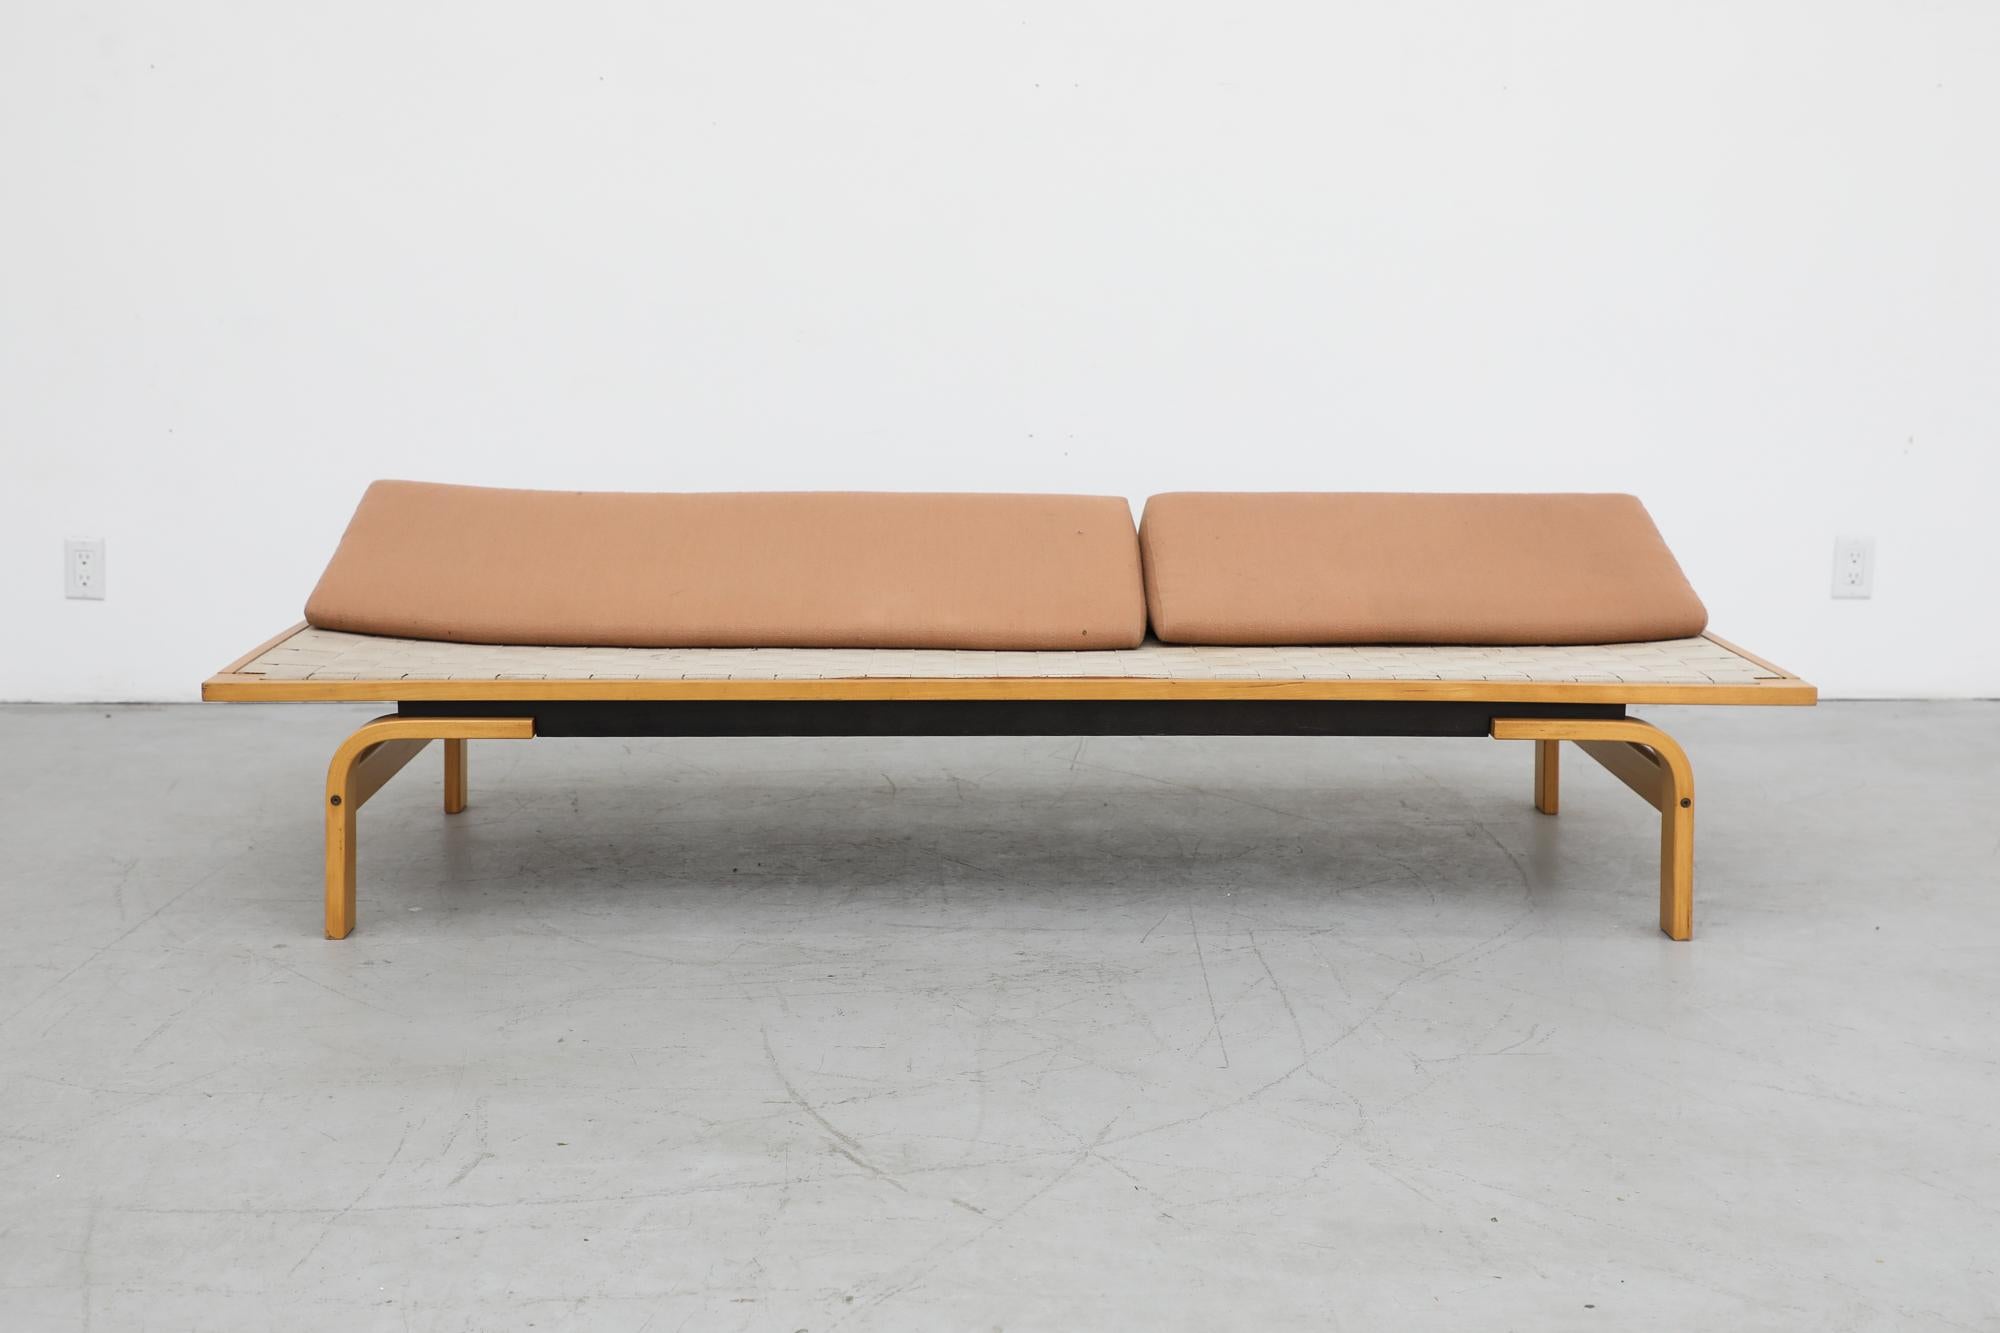 Alvar Aalto Style Daybed with bent wooden legs and original woven strapping and pink wool upholstered triangle cushions. Others have been seen with a thin mattress pad. Visible wear and staining to webbing. Birch Bentwood frame and original webbing.